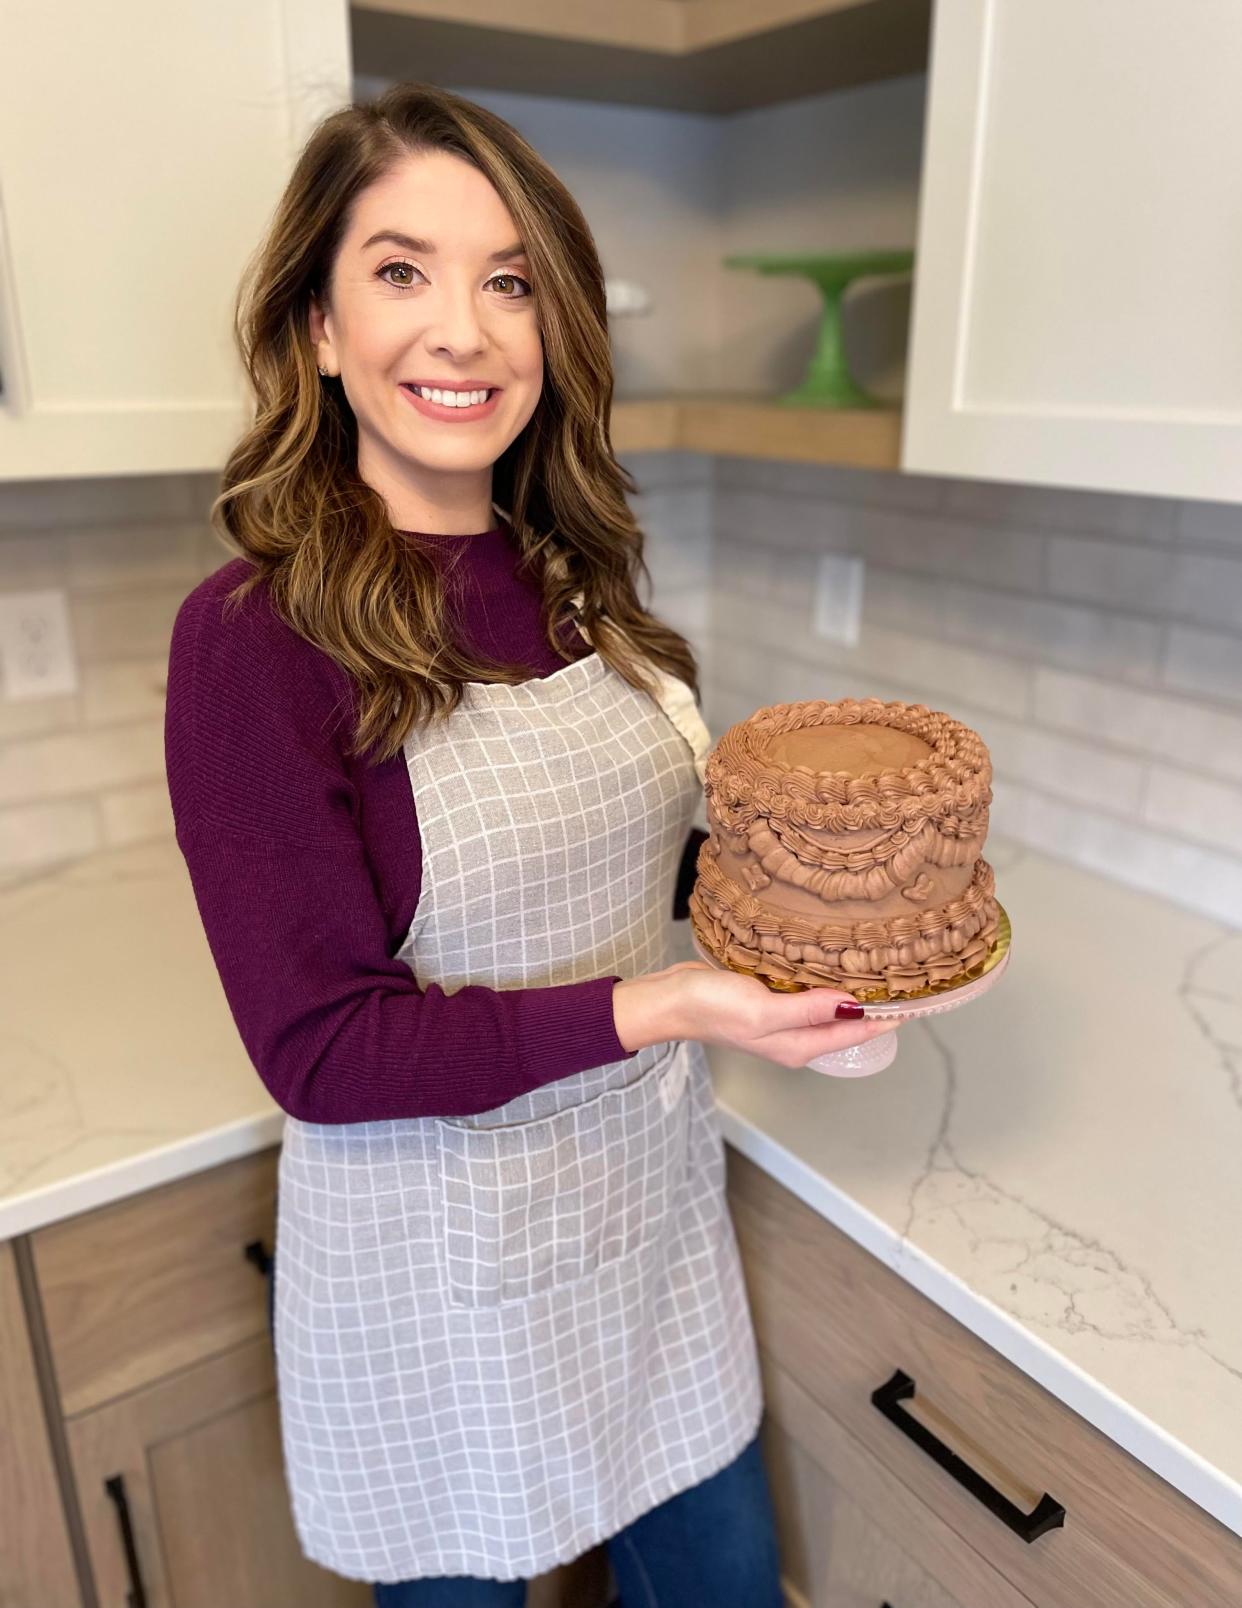 Ashlyn Haury operates Ashlyn's Sweet Revenge, a bakery that specializes in gluten-free cakes and cupcakes.